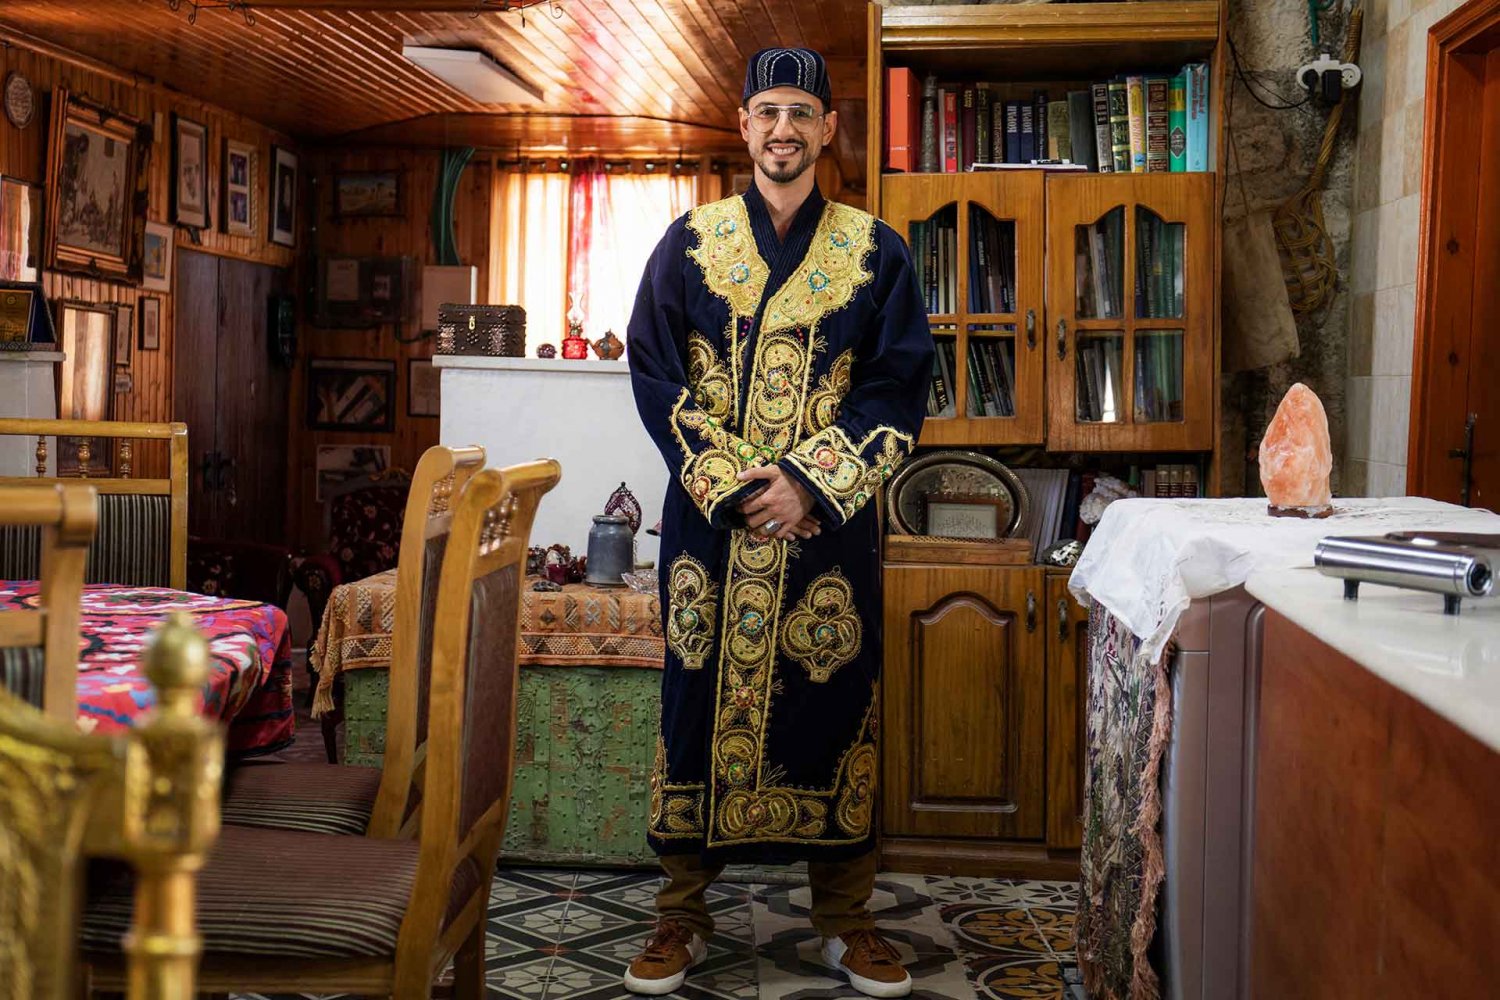 Izzeldin Bukhari dressed in one of the original garments (brought from Bukhara) at the Naqshabandi Center in the Old City of Jerusalem, August 20, 2022